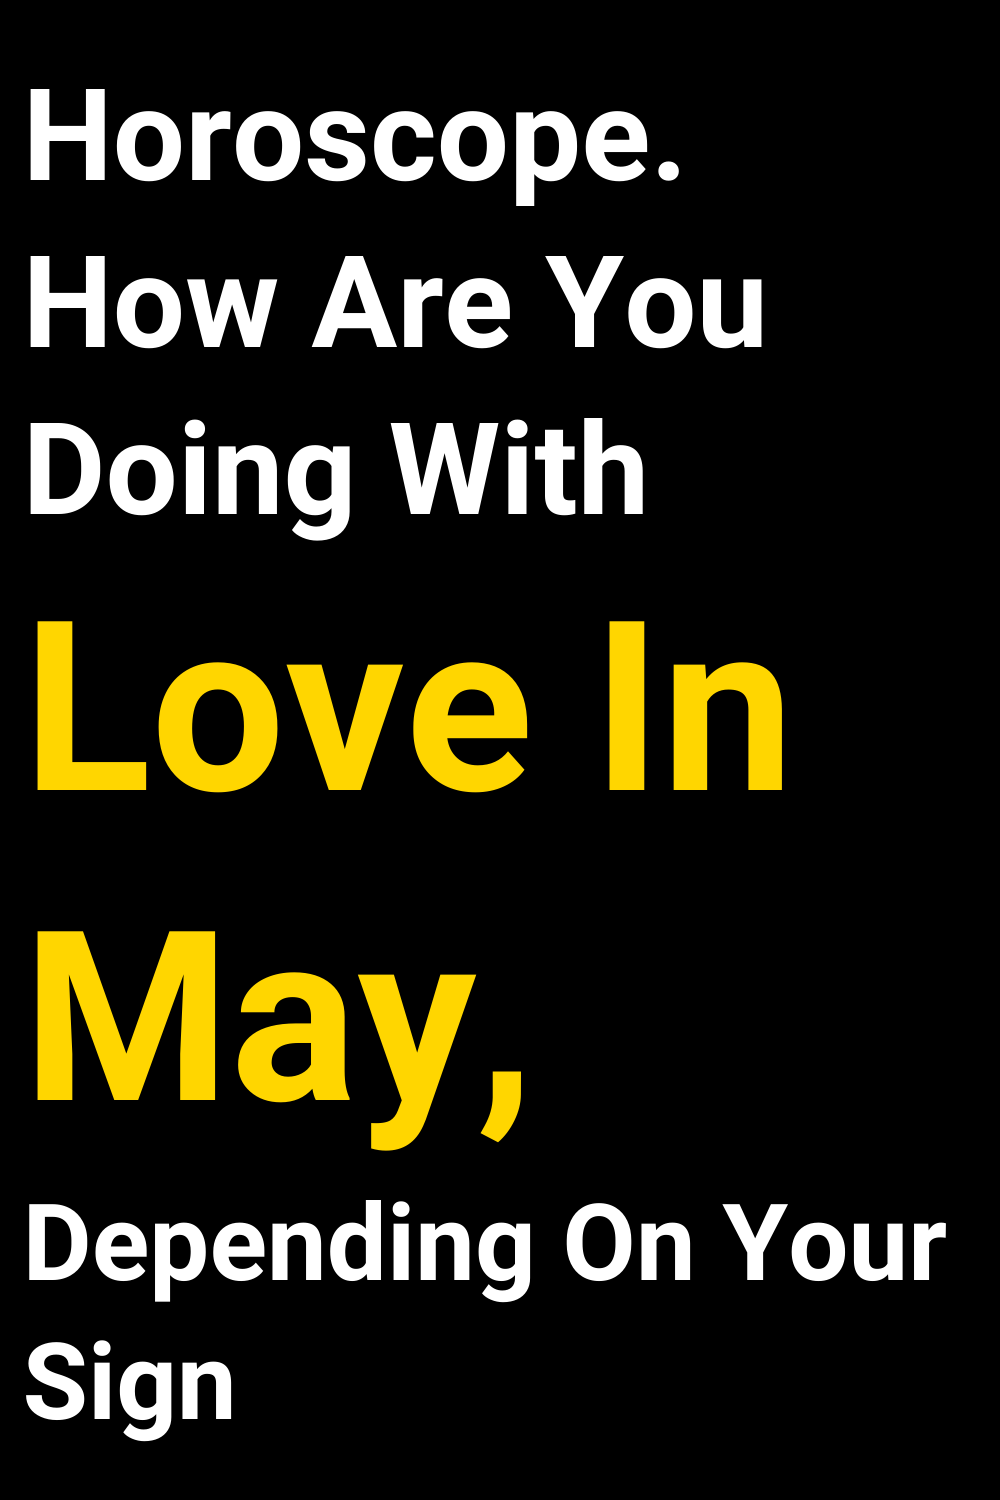 Horoscope. How Are You Doing With Love In May, Depending On Your Sign